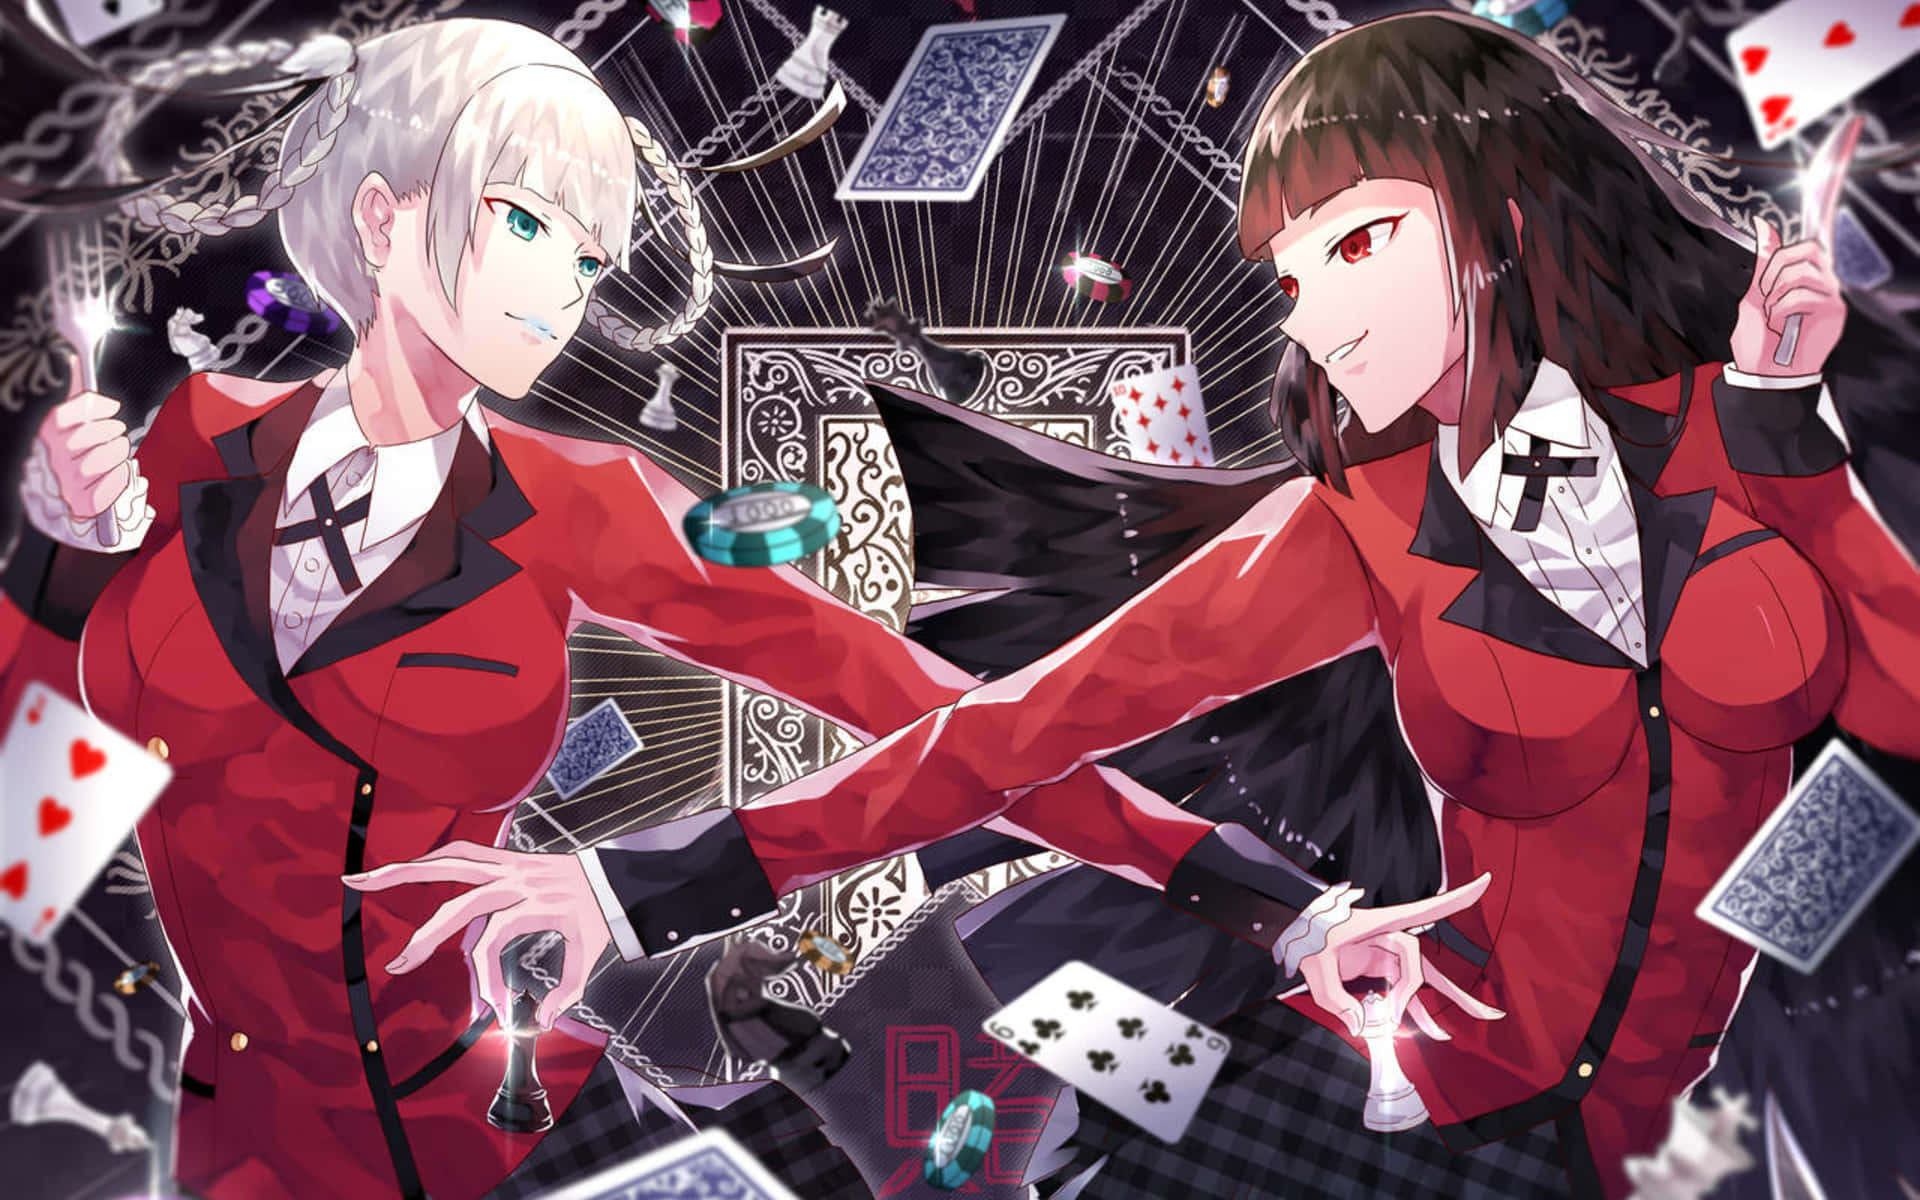 Watch Yumeko Jabami trick her opponents and come out on top in the game that decides the fate of high-rolling students at Hyakkaou Academy - Kakegurui.